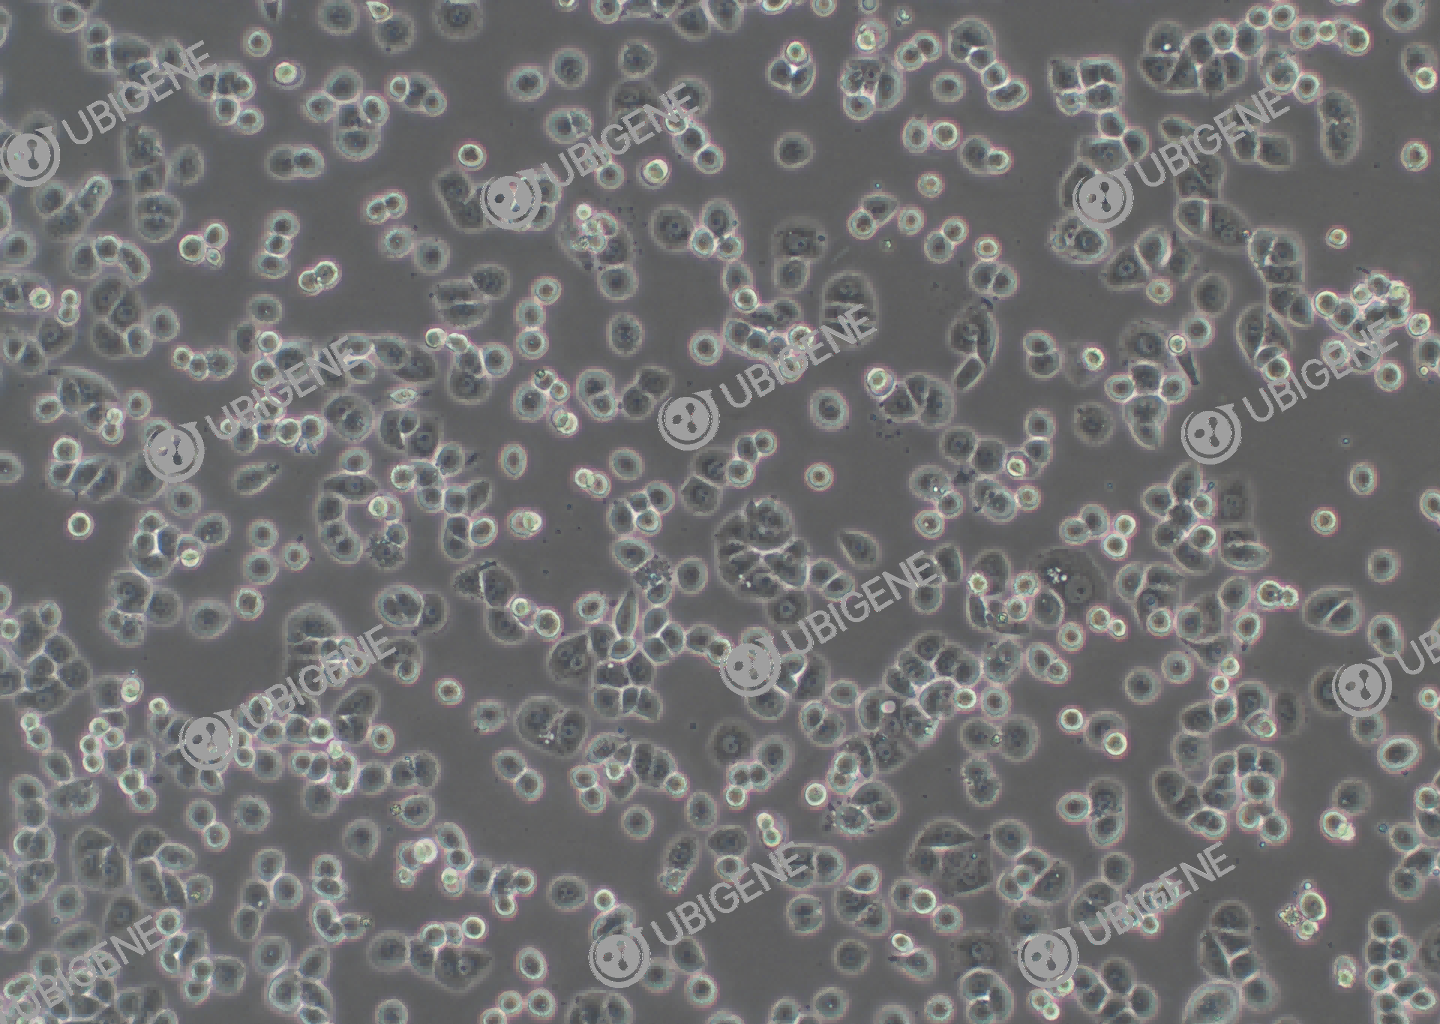 MDA-MB-468 cell line Cultured cell morphology